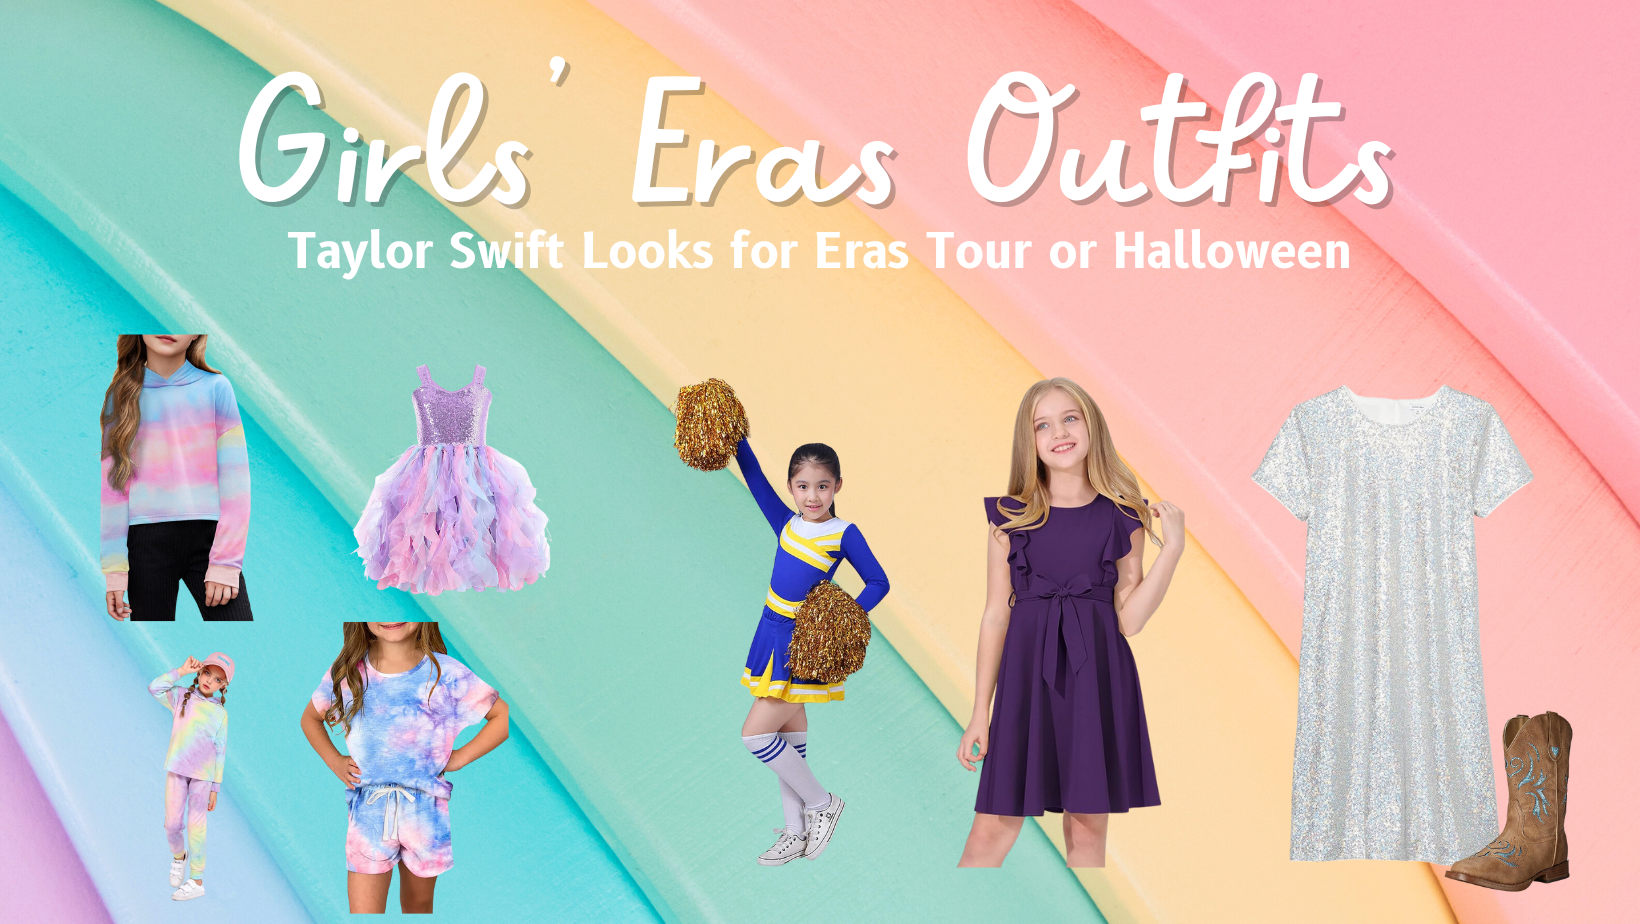 Taylor Swift Concert Outfit Ideas For The Eras Tour By Era